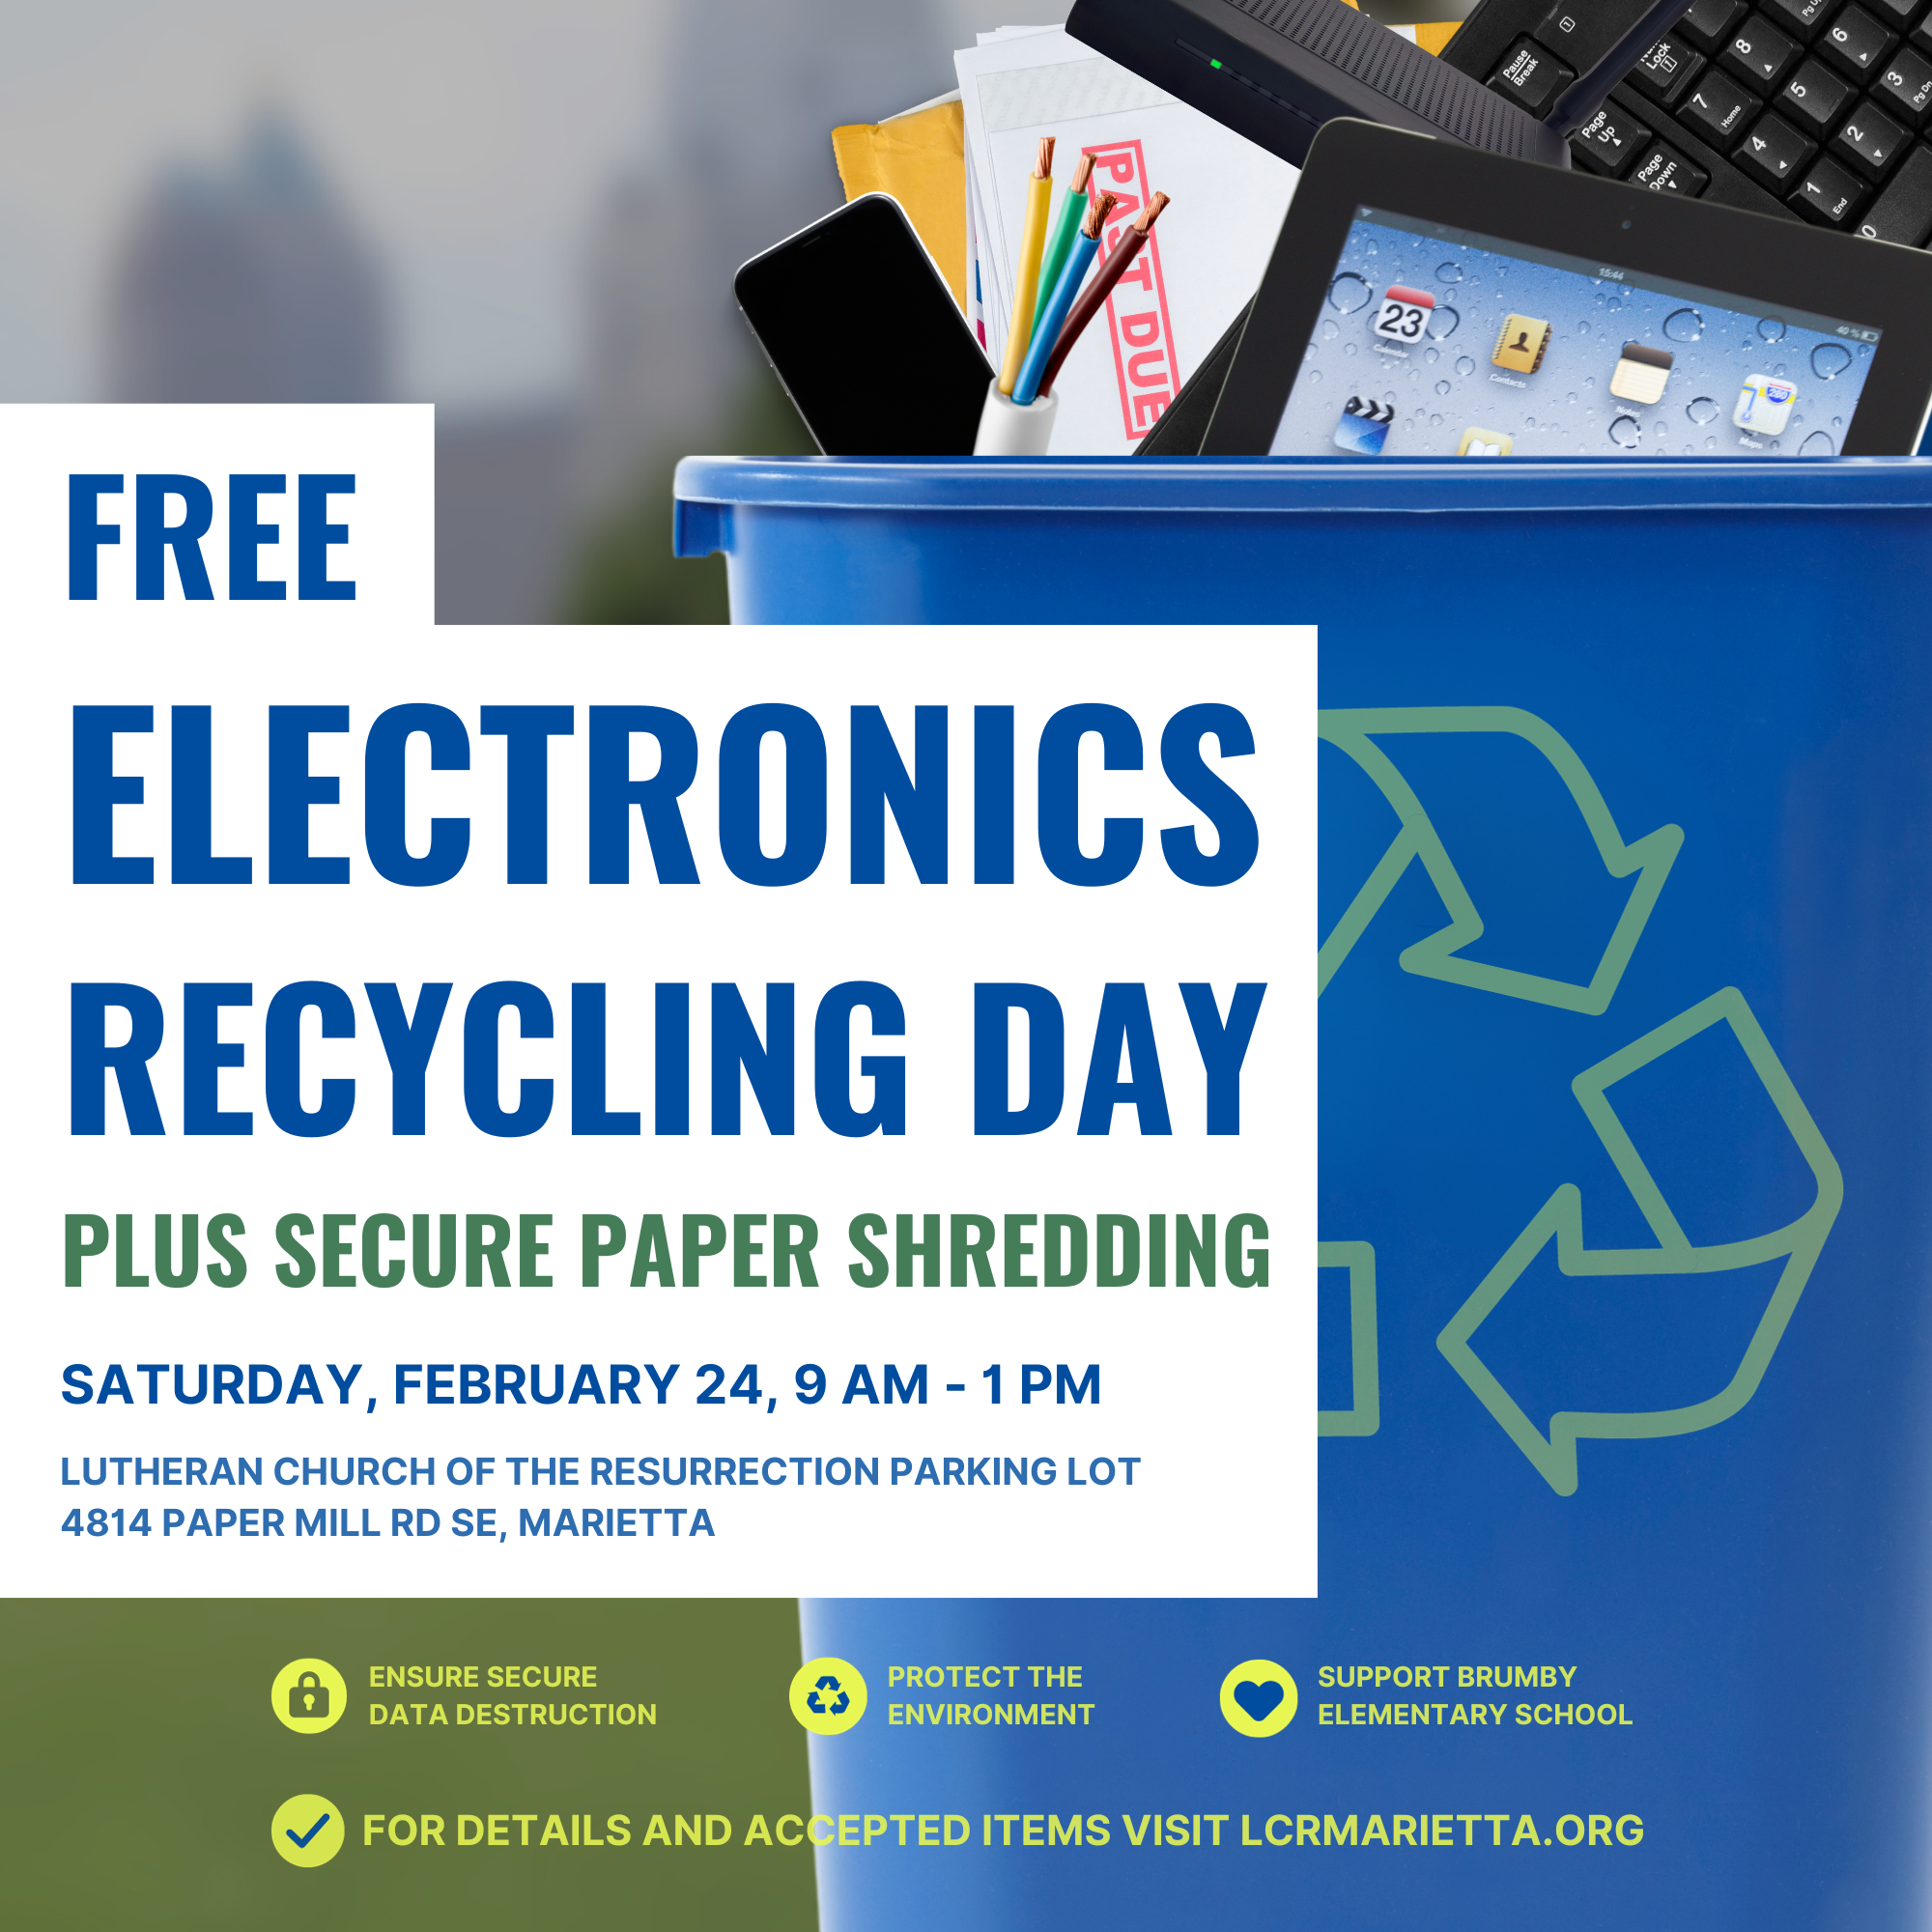 Free Electronics Recycling Event benefiting Brumby Elementary